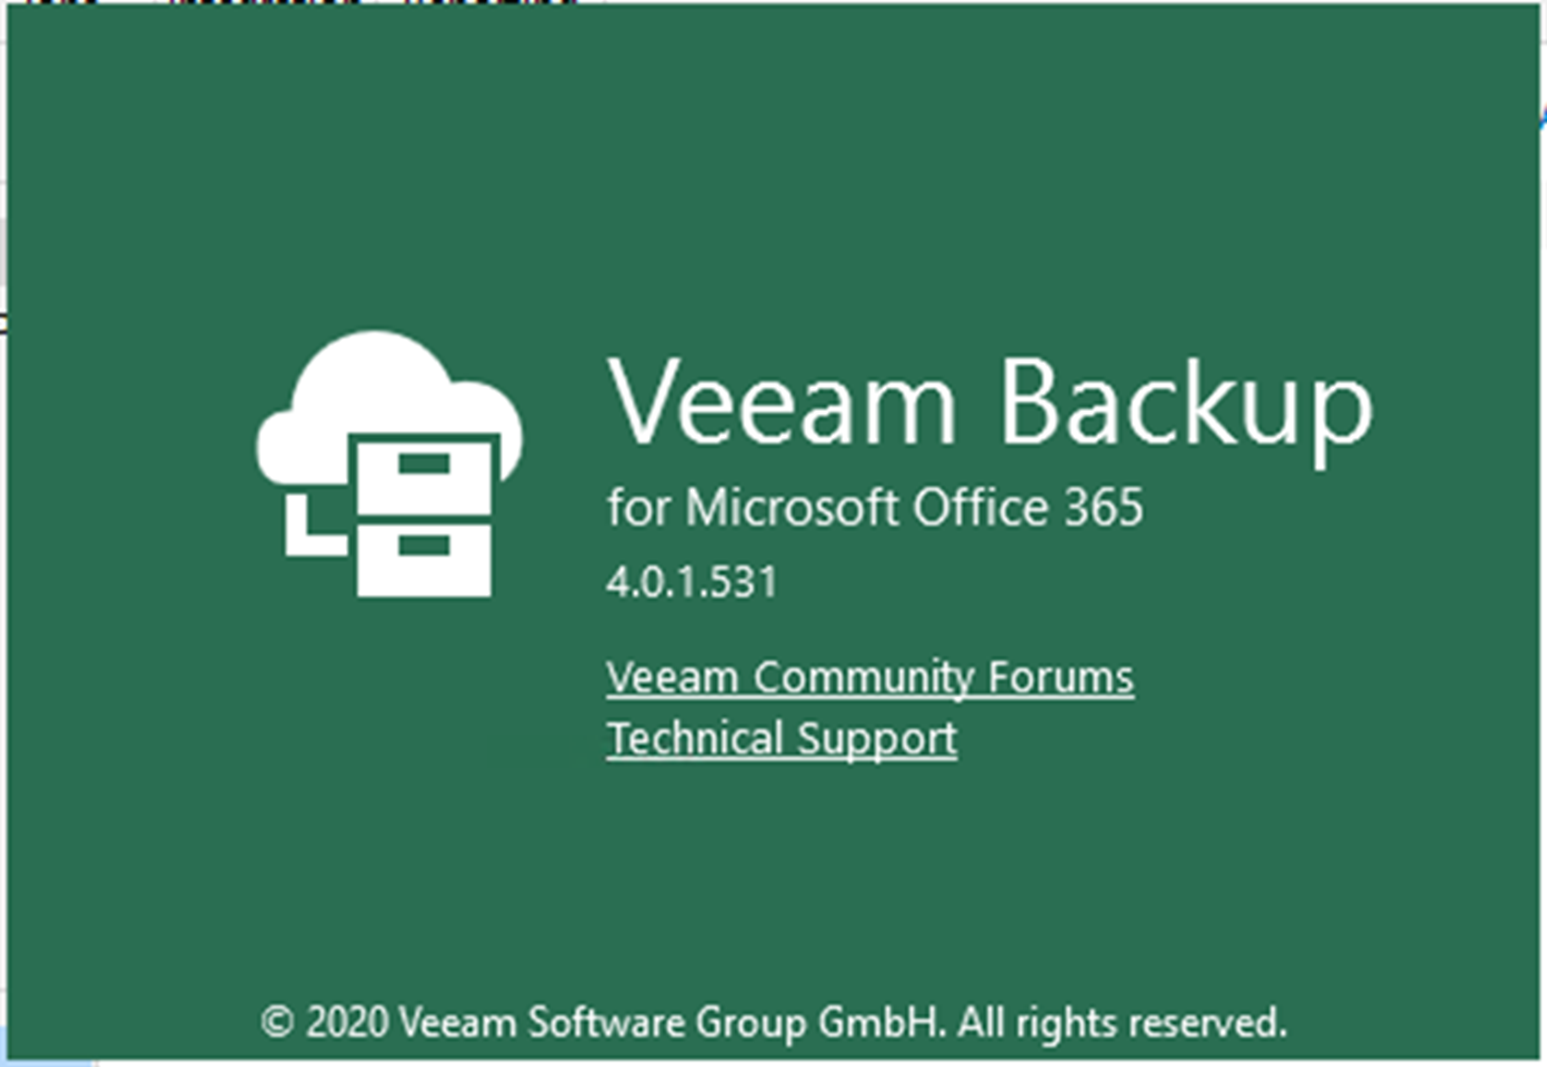 100420 0035 HowtoInstal3 - How to Upgrade Veeam Backup for Microsoft Office 365 to V4c Day 0 Update